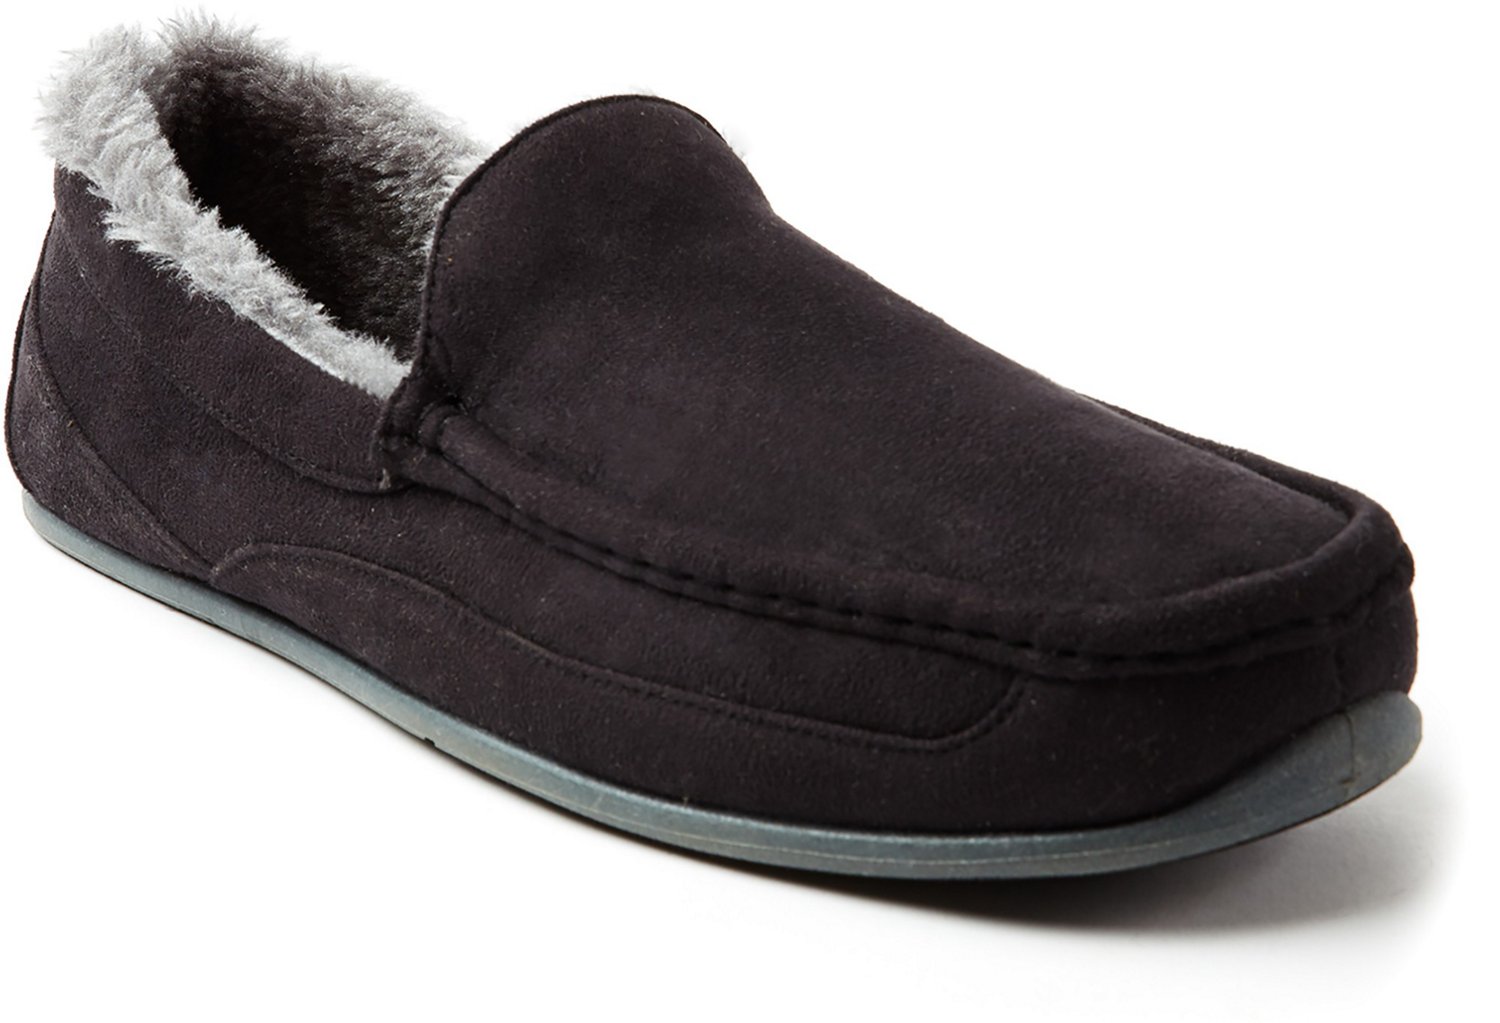 Deer Stags Men’s Slipperooz Moccasin Slippers | Academy